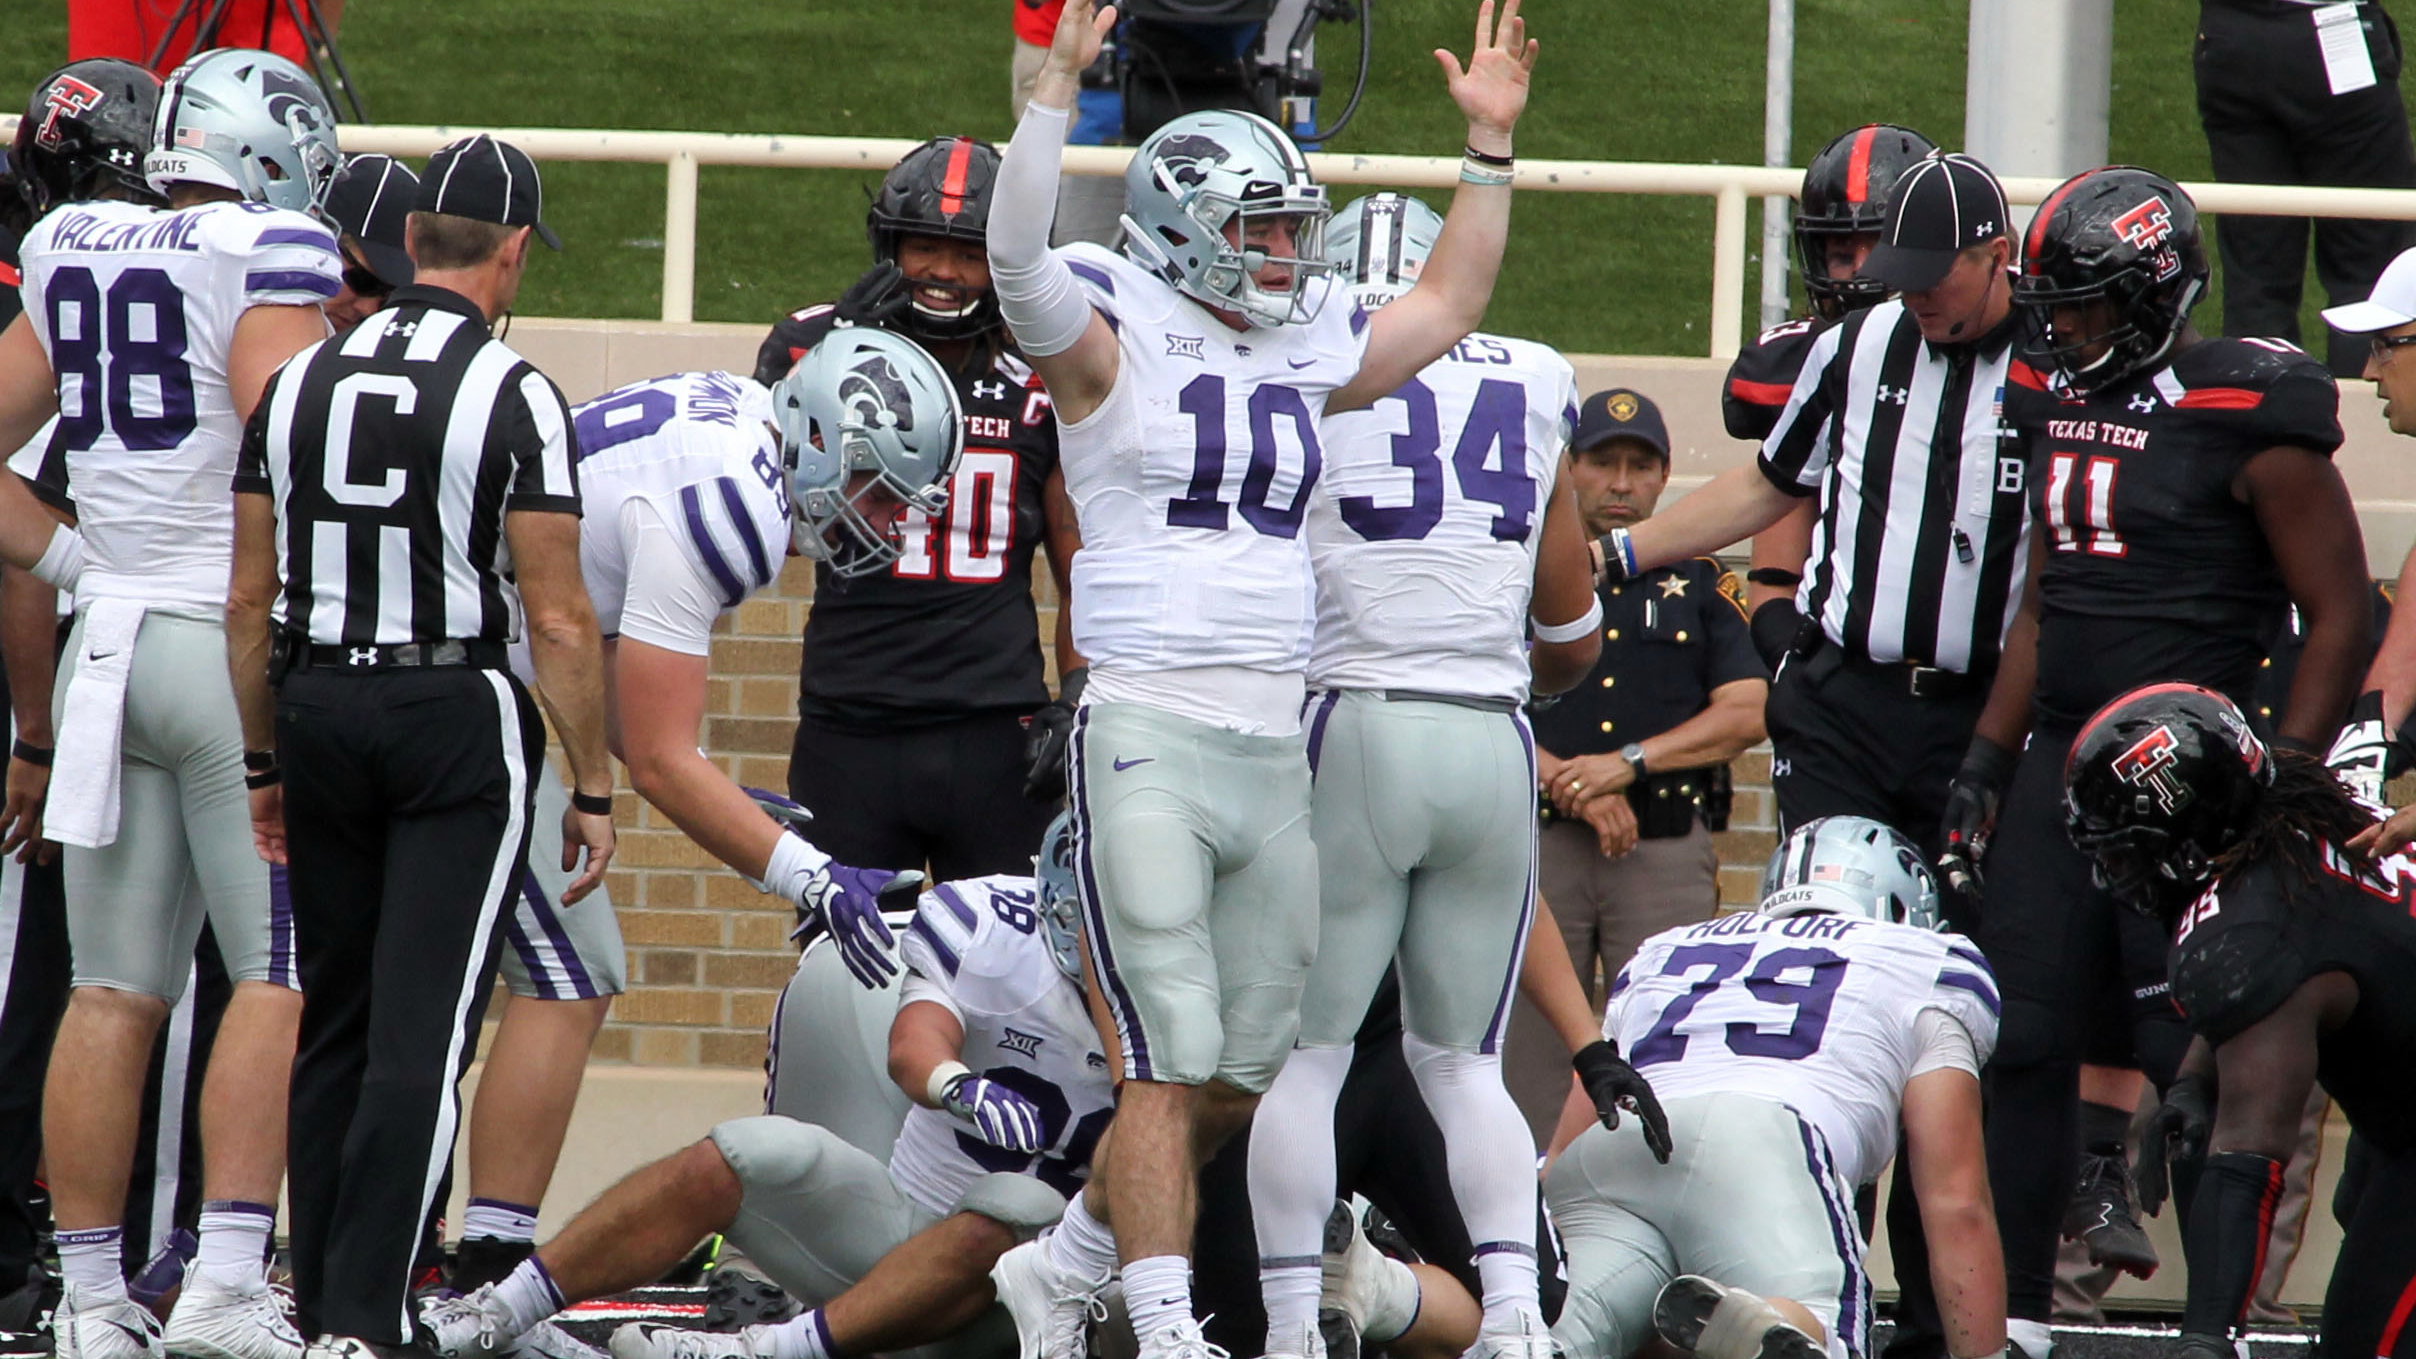 K-State hosts West Virginia with usual uncertainty about QB